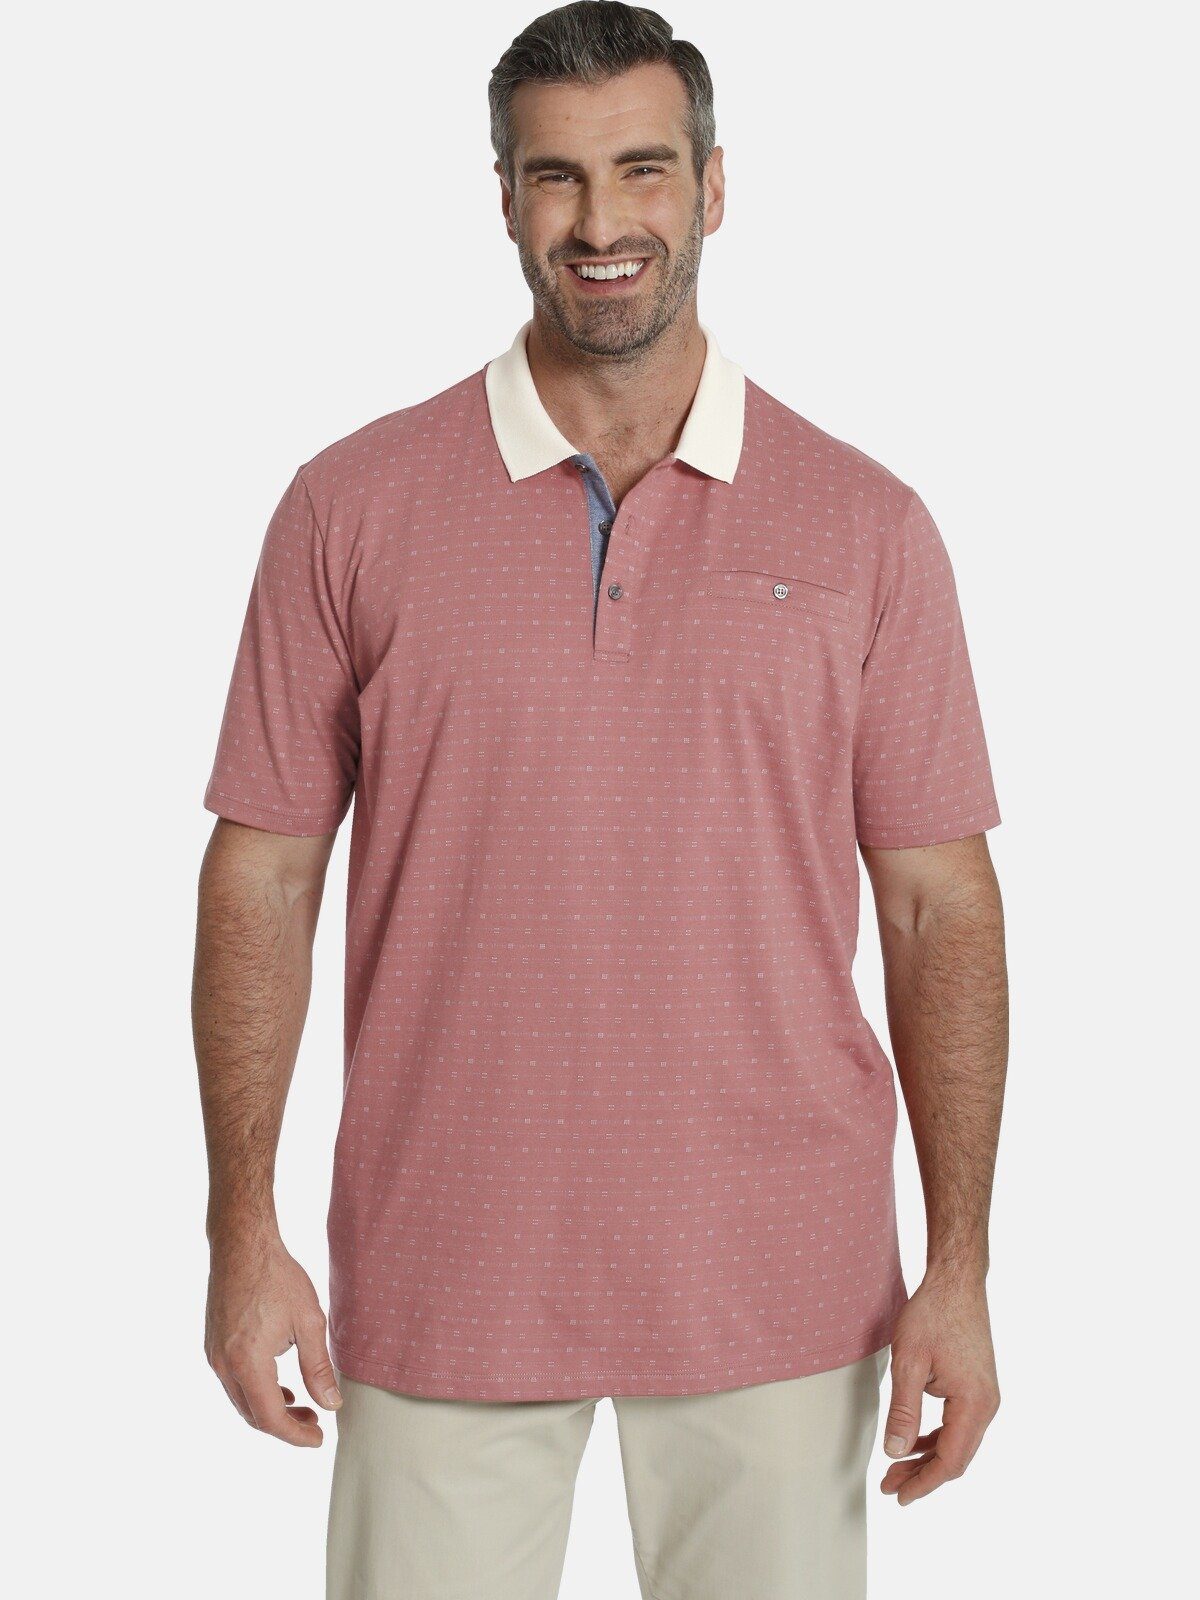 Charles Colby Poloshirt EARL MIKE Retro-Stil bequeme Passform